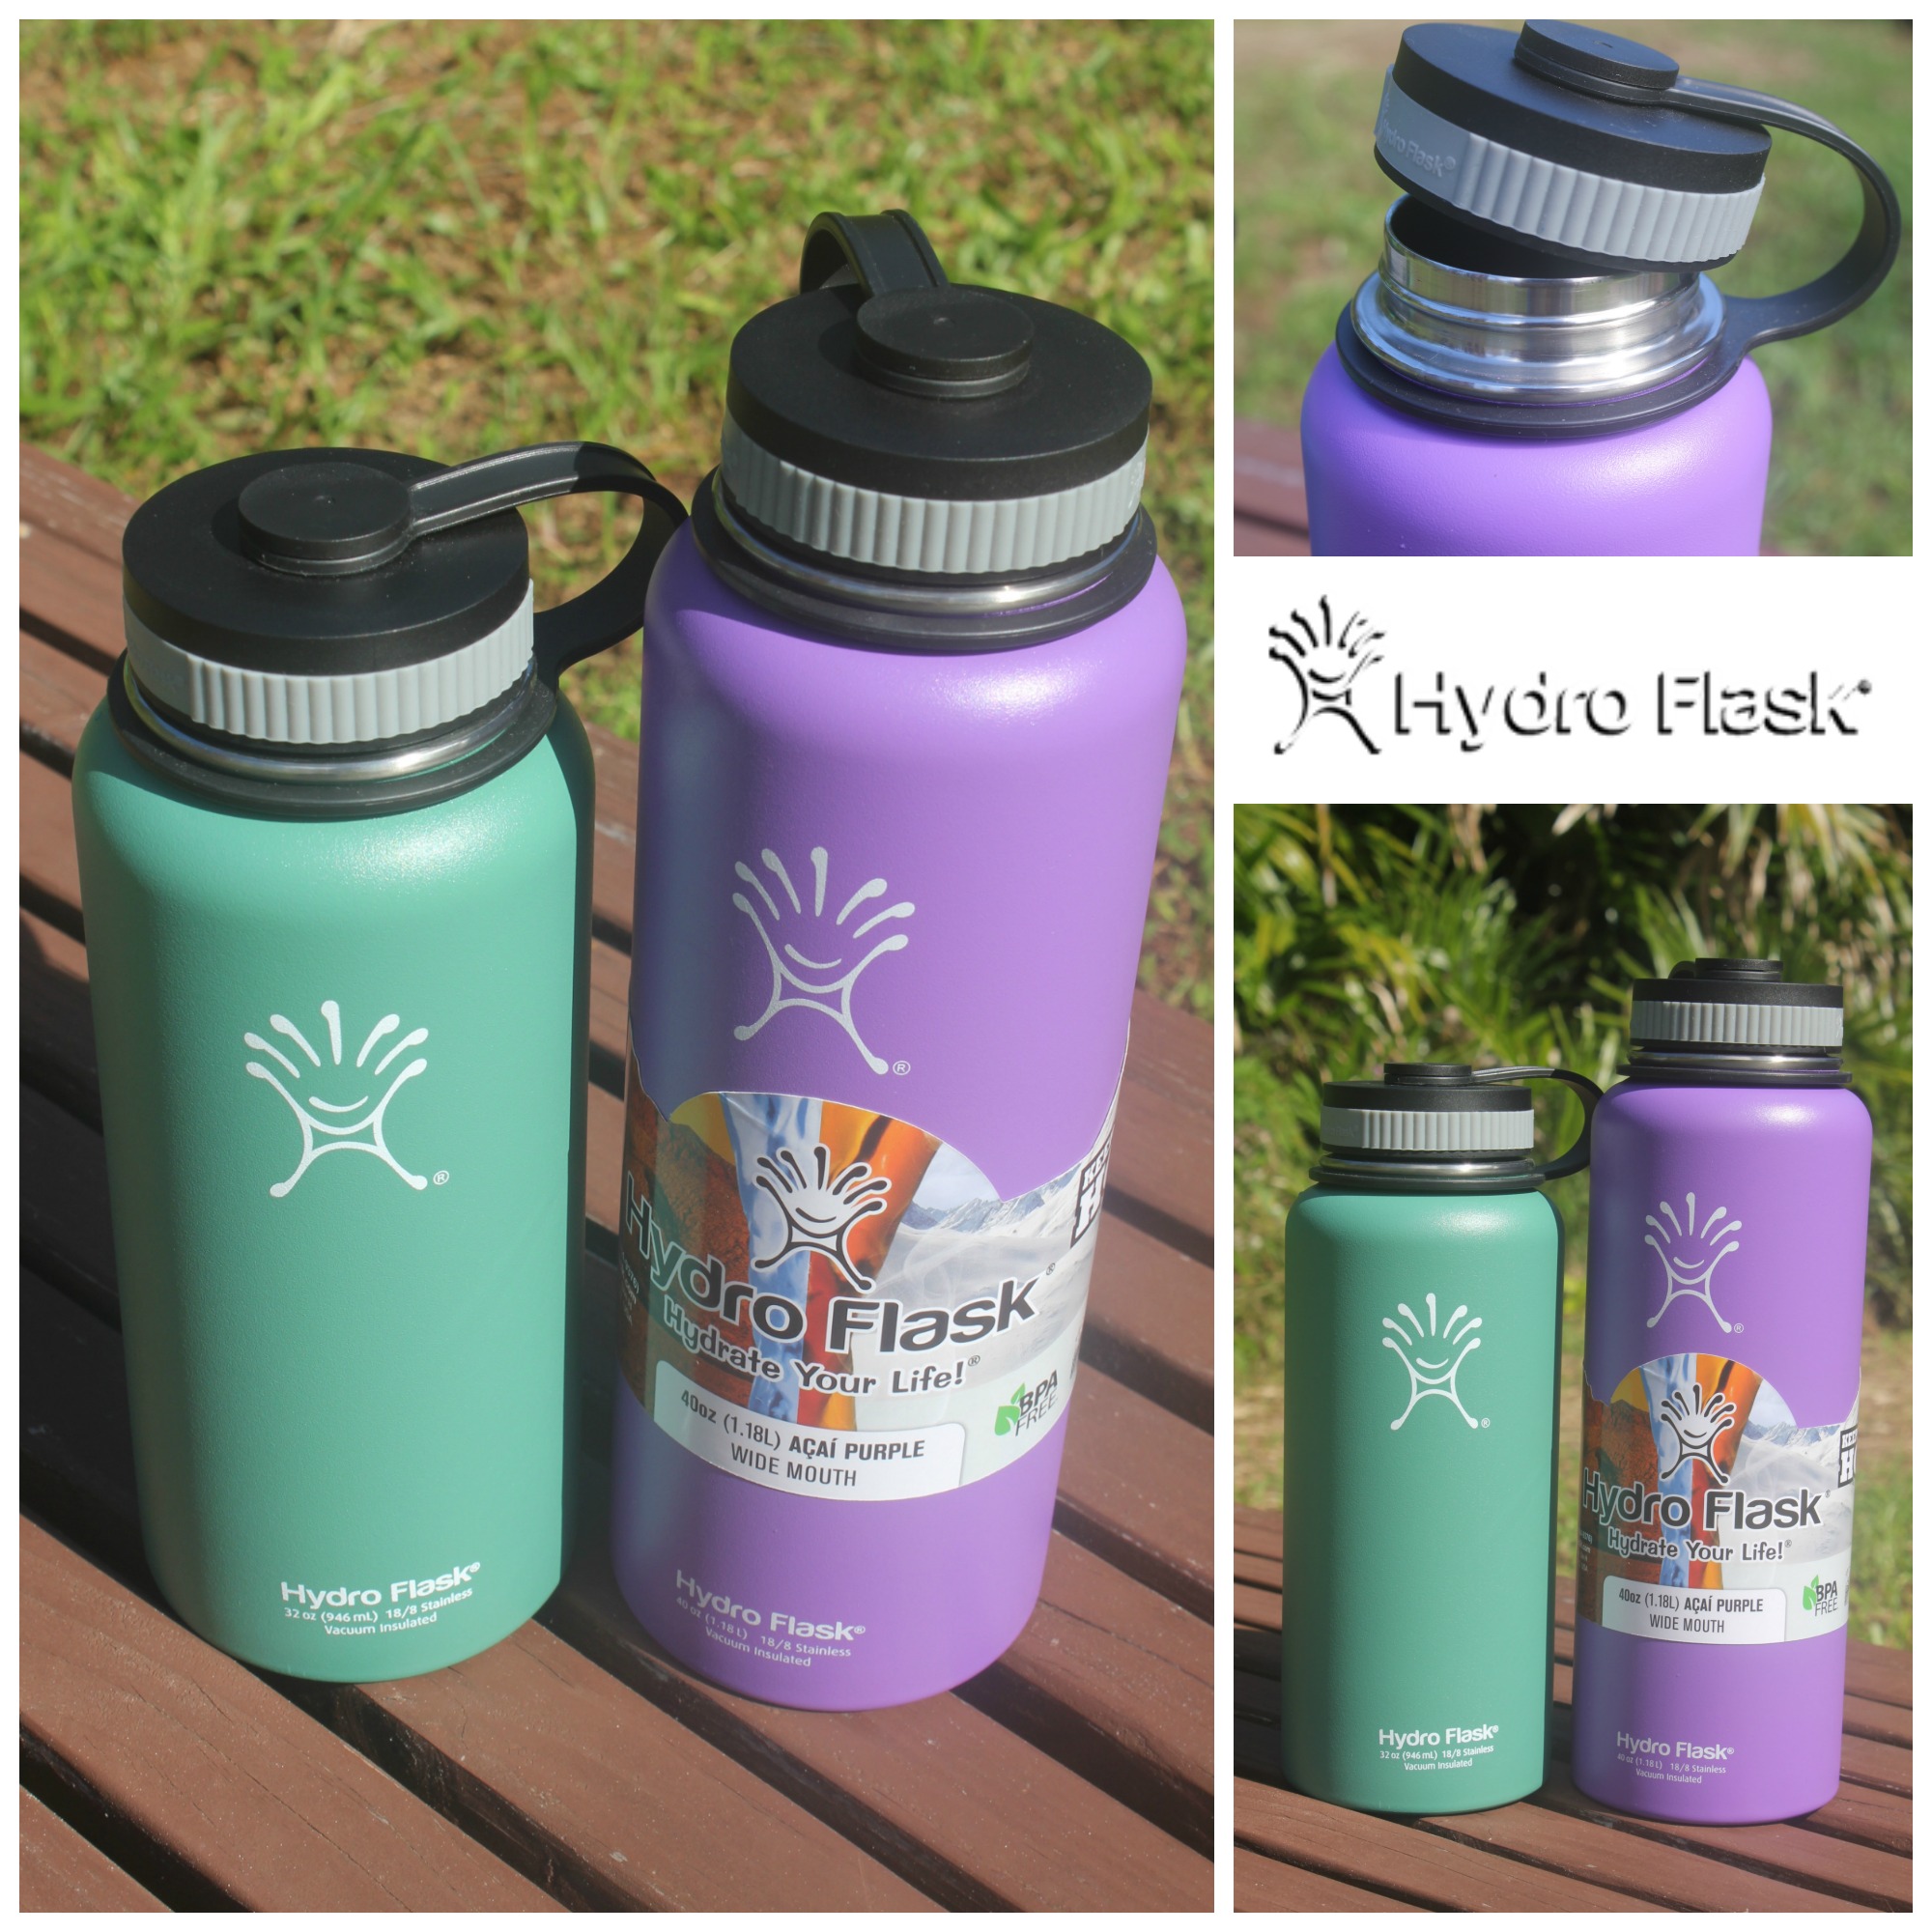 http://livinthemommylife.com/wp-content/uploads/2014/12/Hydro-Flask-Holiday-Gift-Guide.jpg